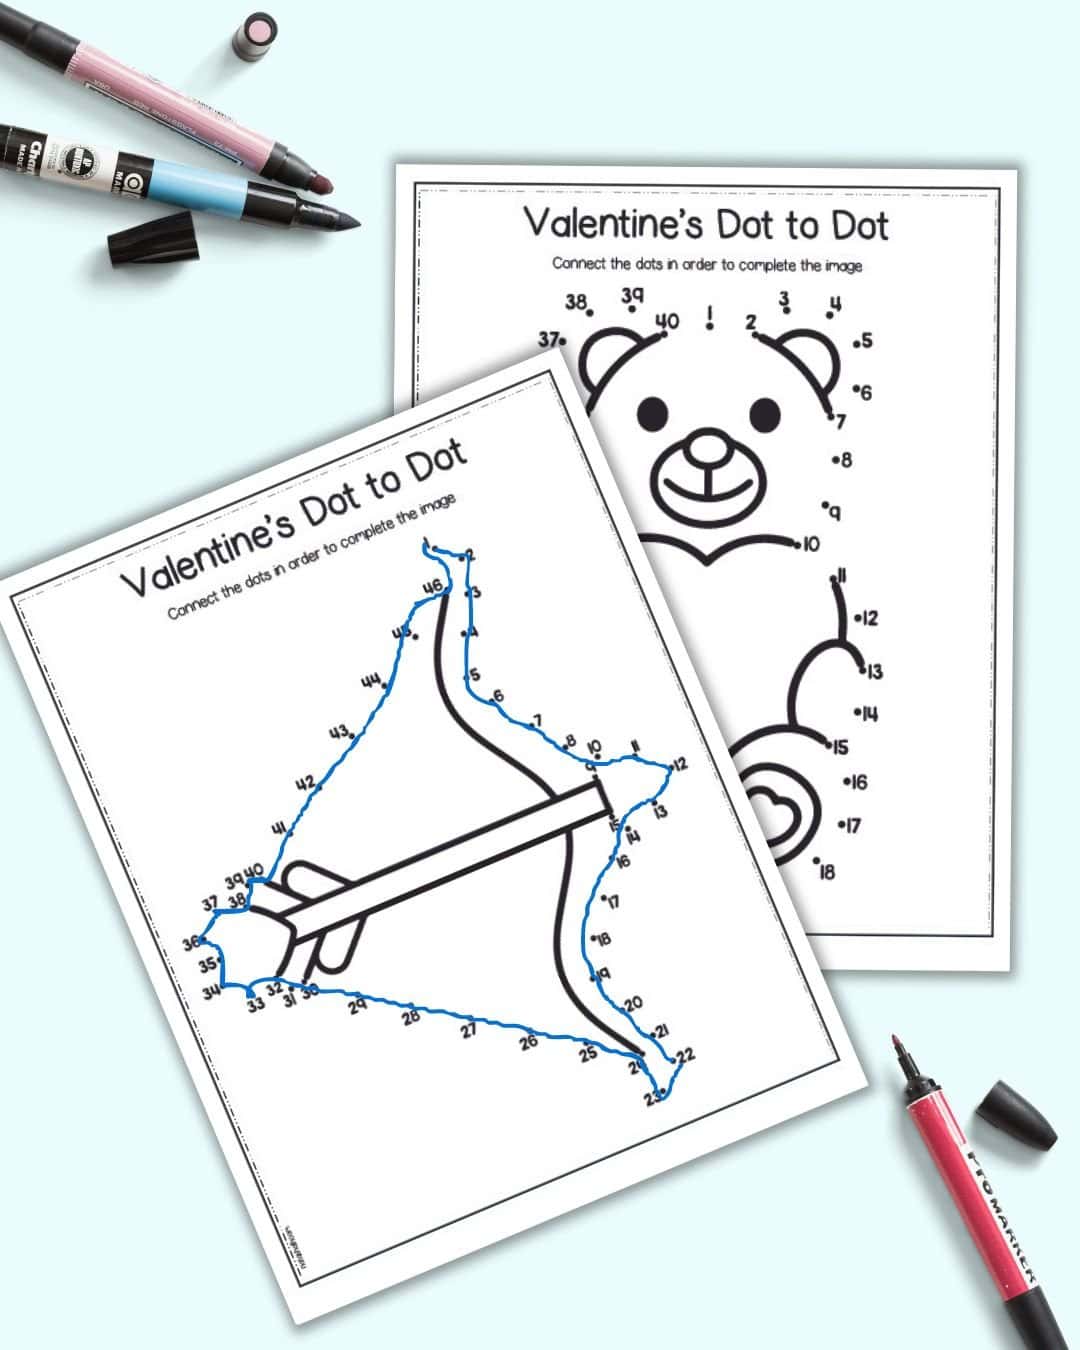 A preview of two Valentine's themed connect the dots worksheets. One is completed and shows a bow and arrow. A teddy bear holding a heart is on a second page behind the completed one.